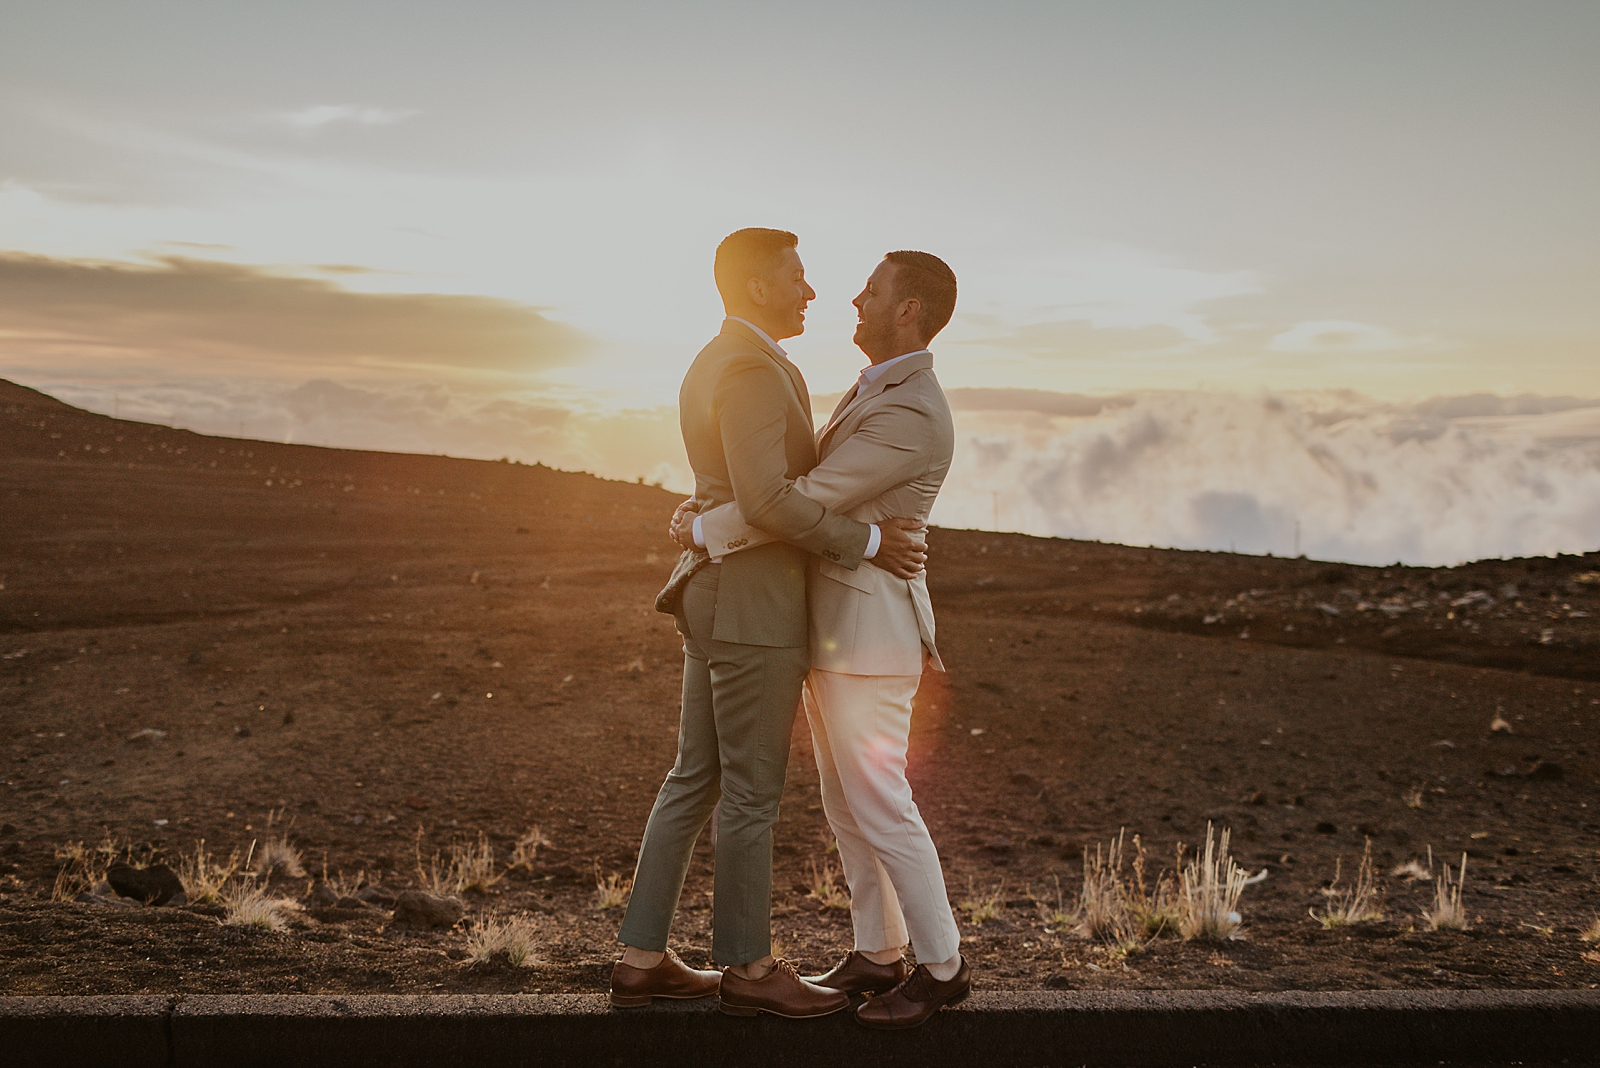 Grooms hugging each other by the side of the road with the sun setting